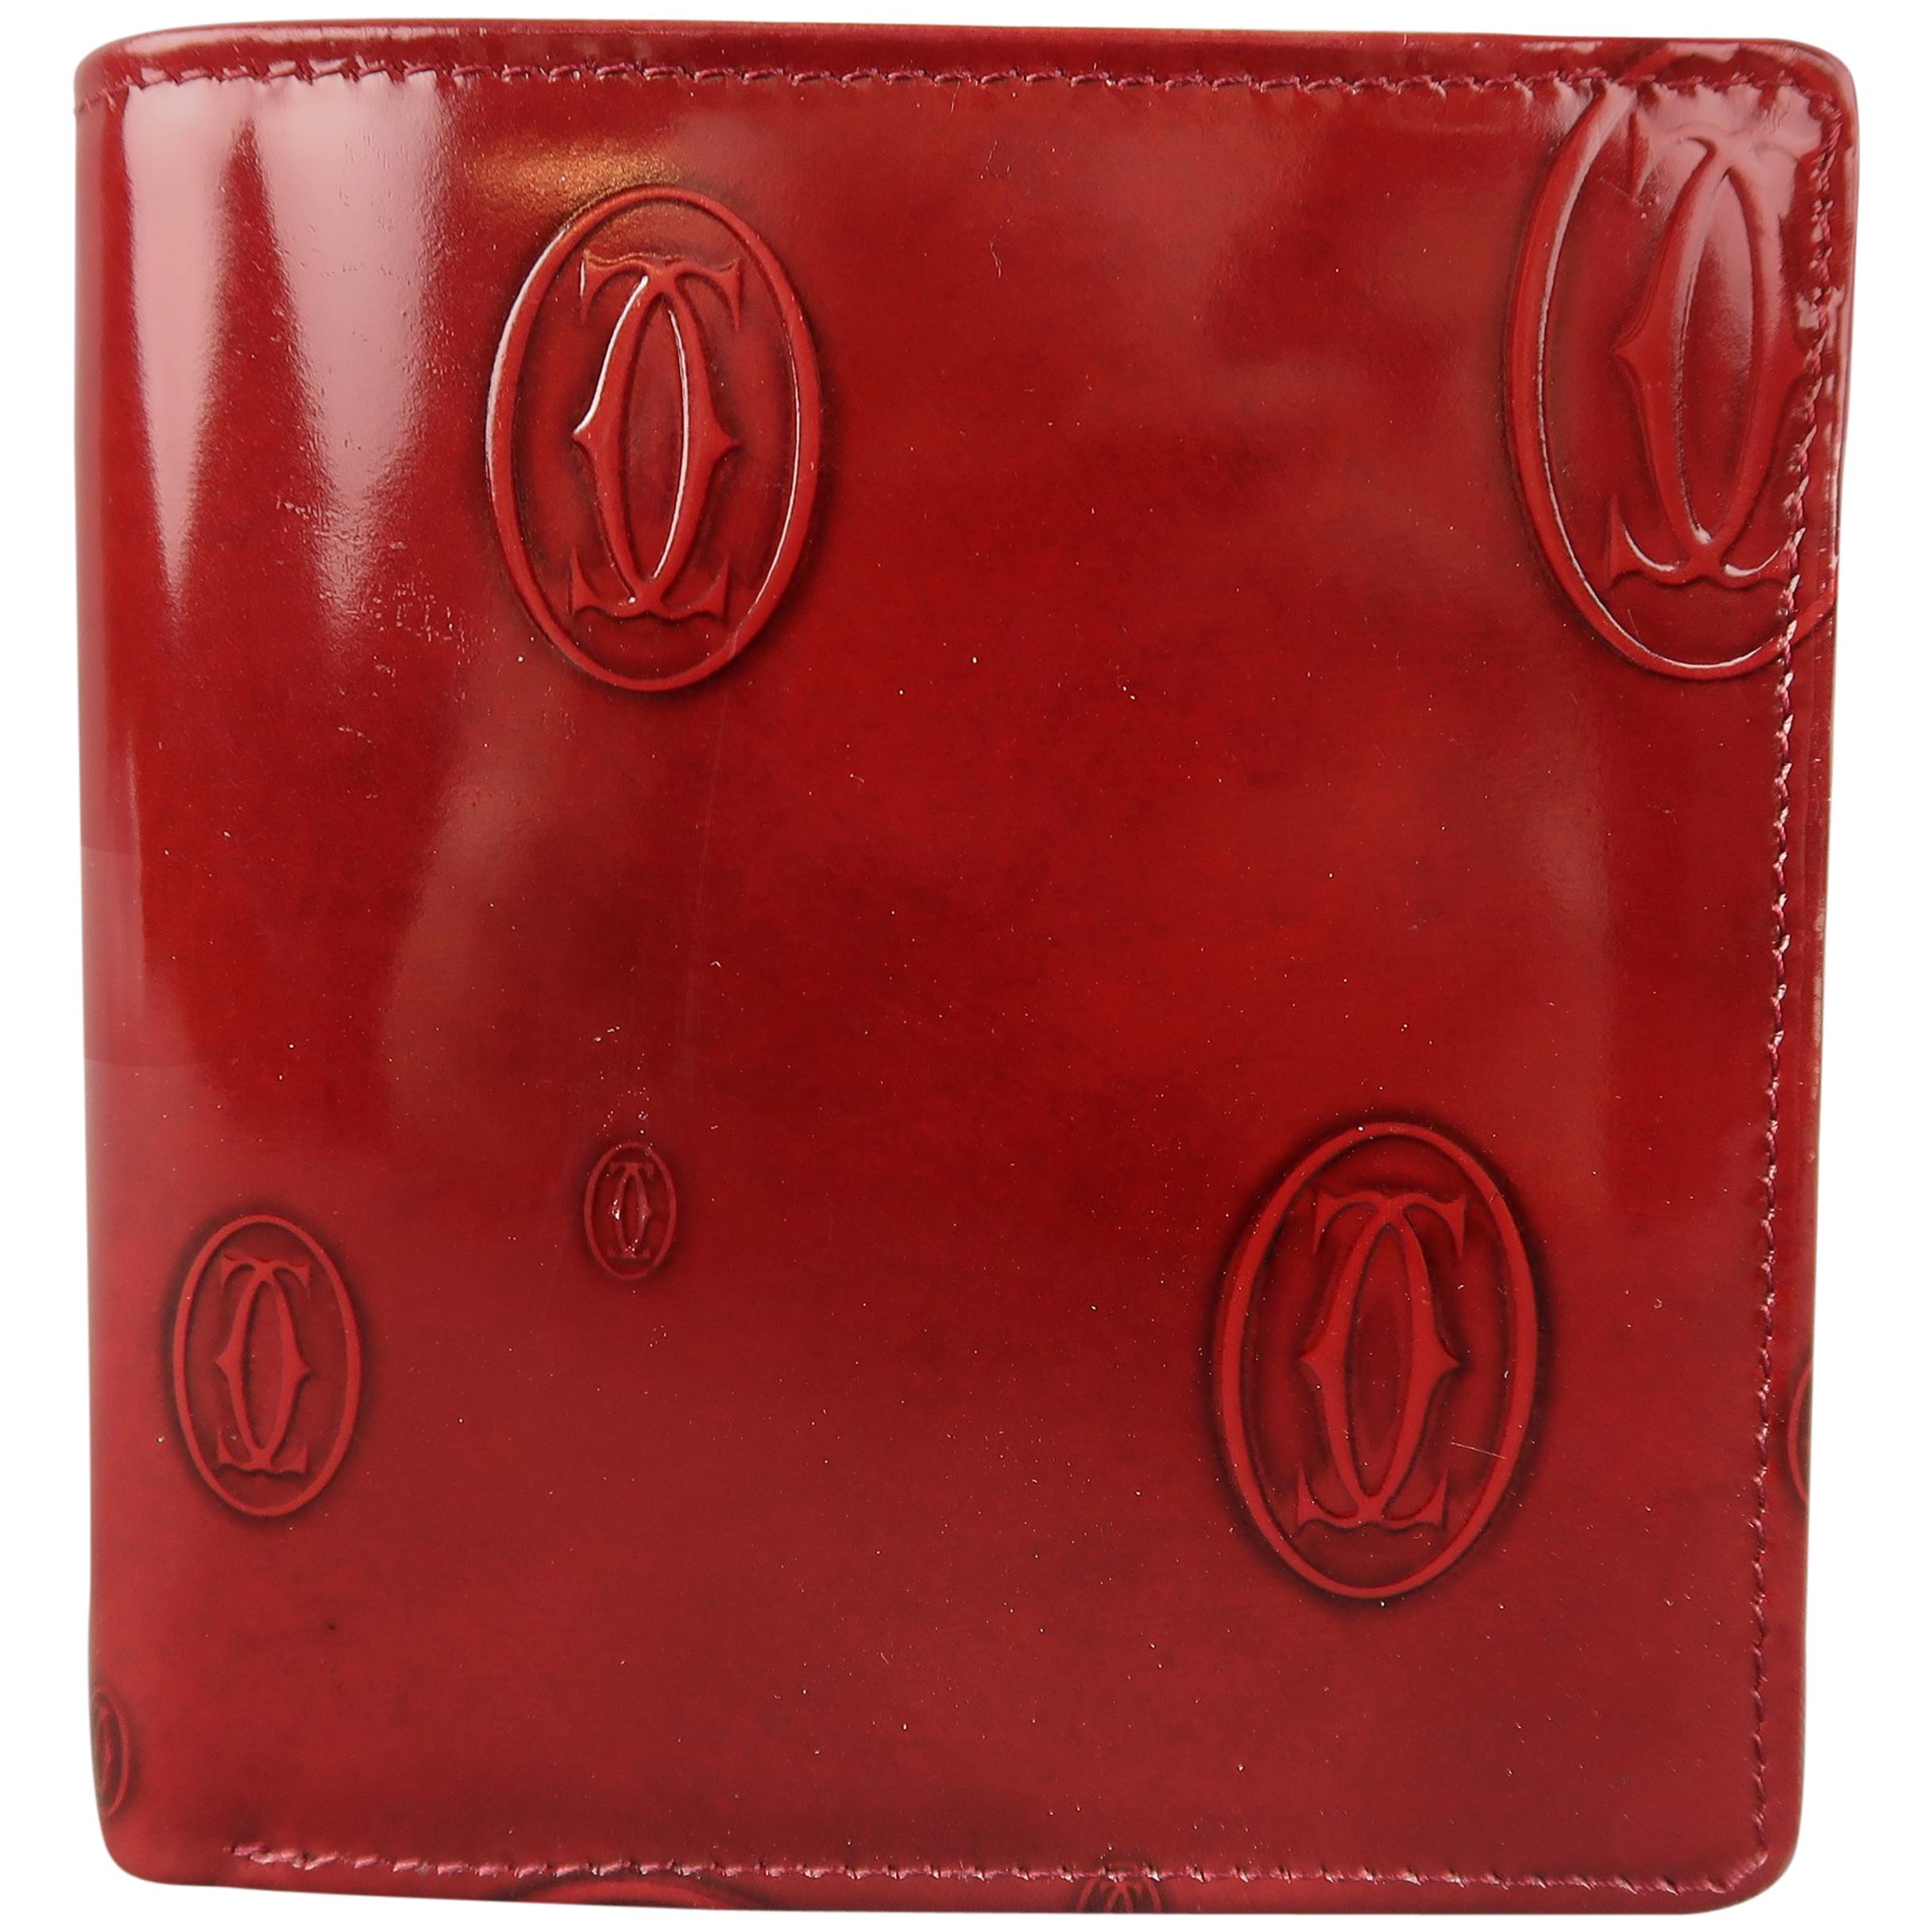 CARTIER Burgundy Logo Embossed Patent Leather Bifold Happy Birthday Wallet